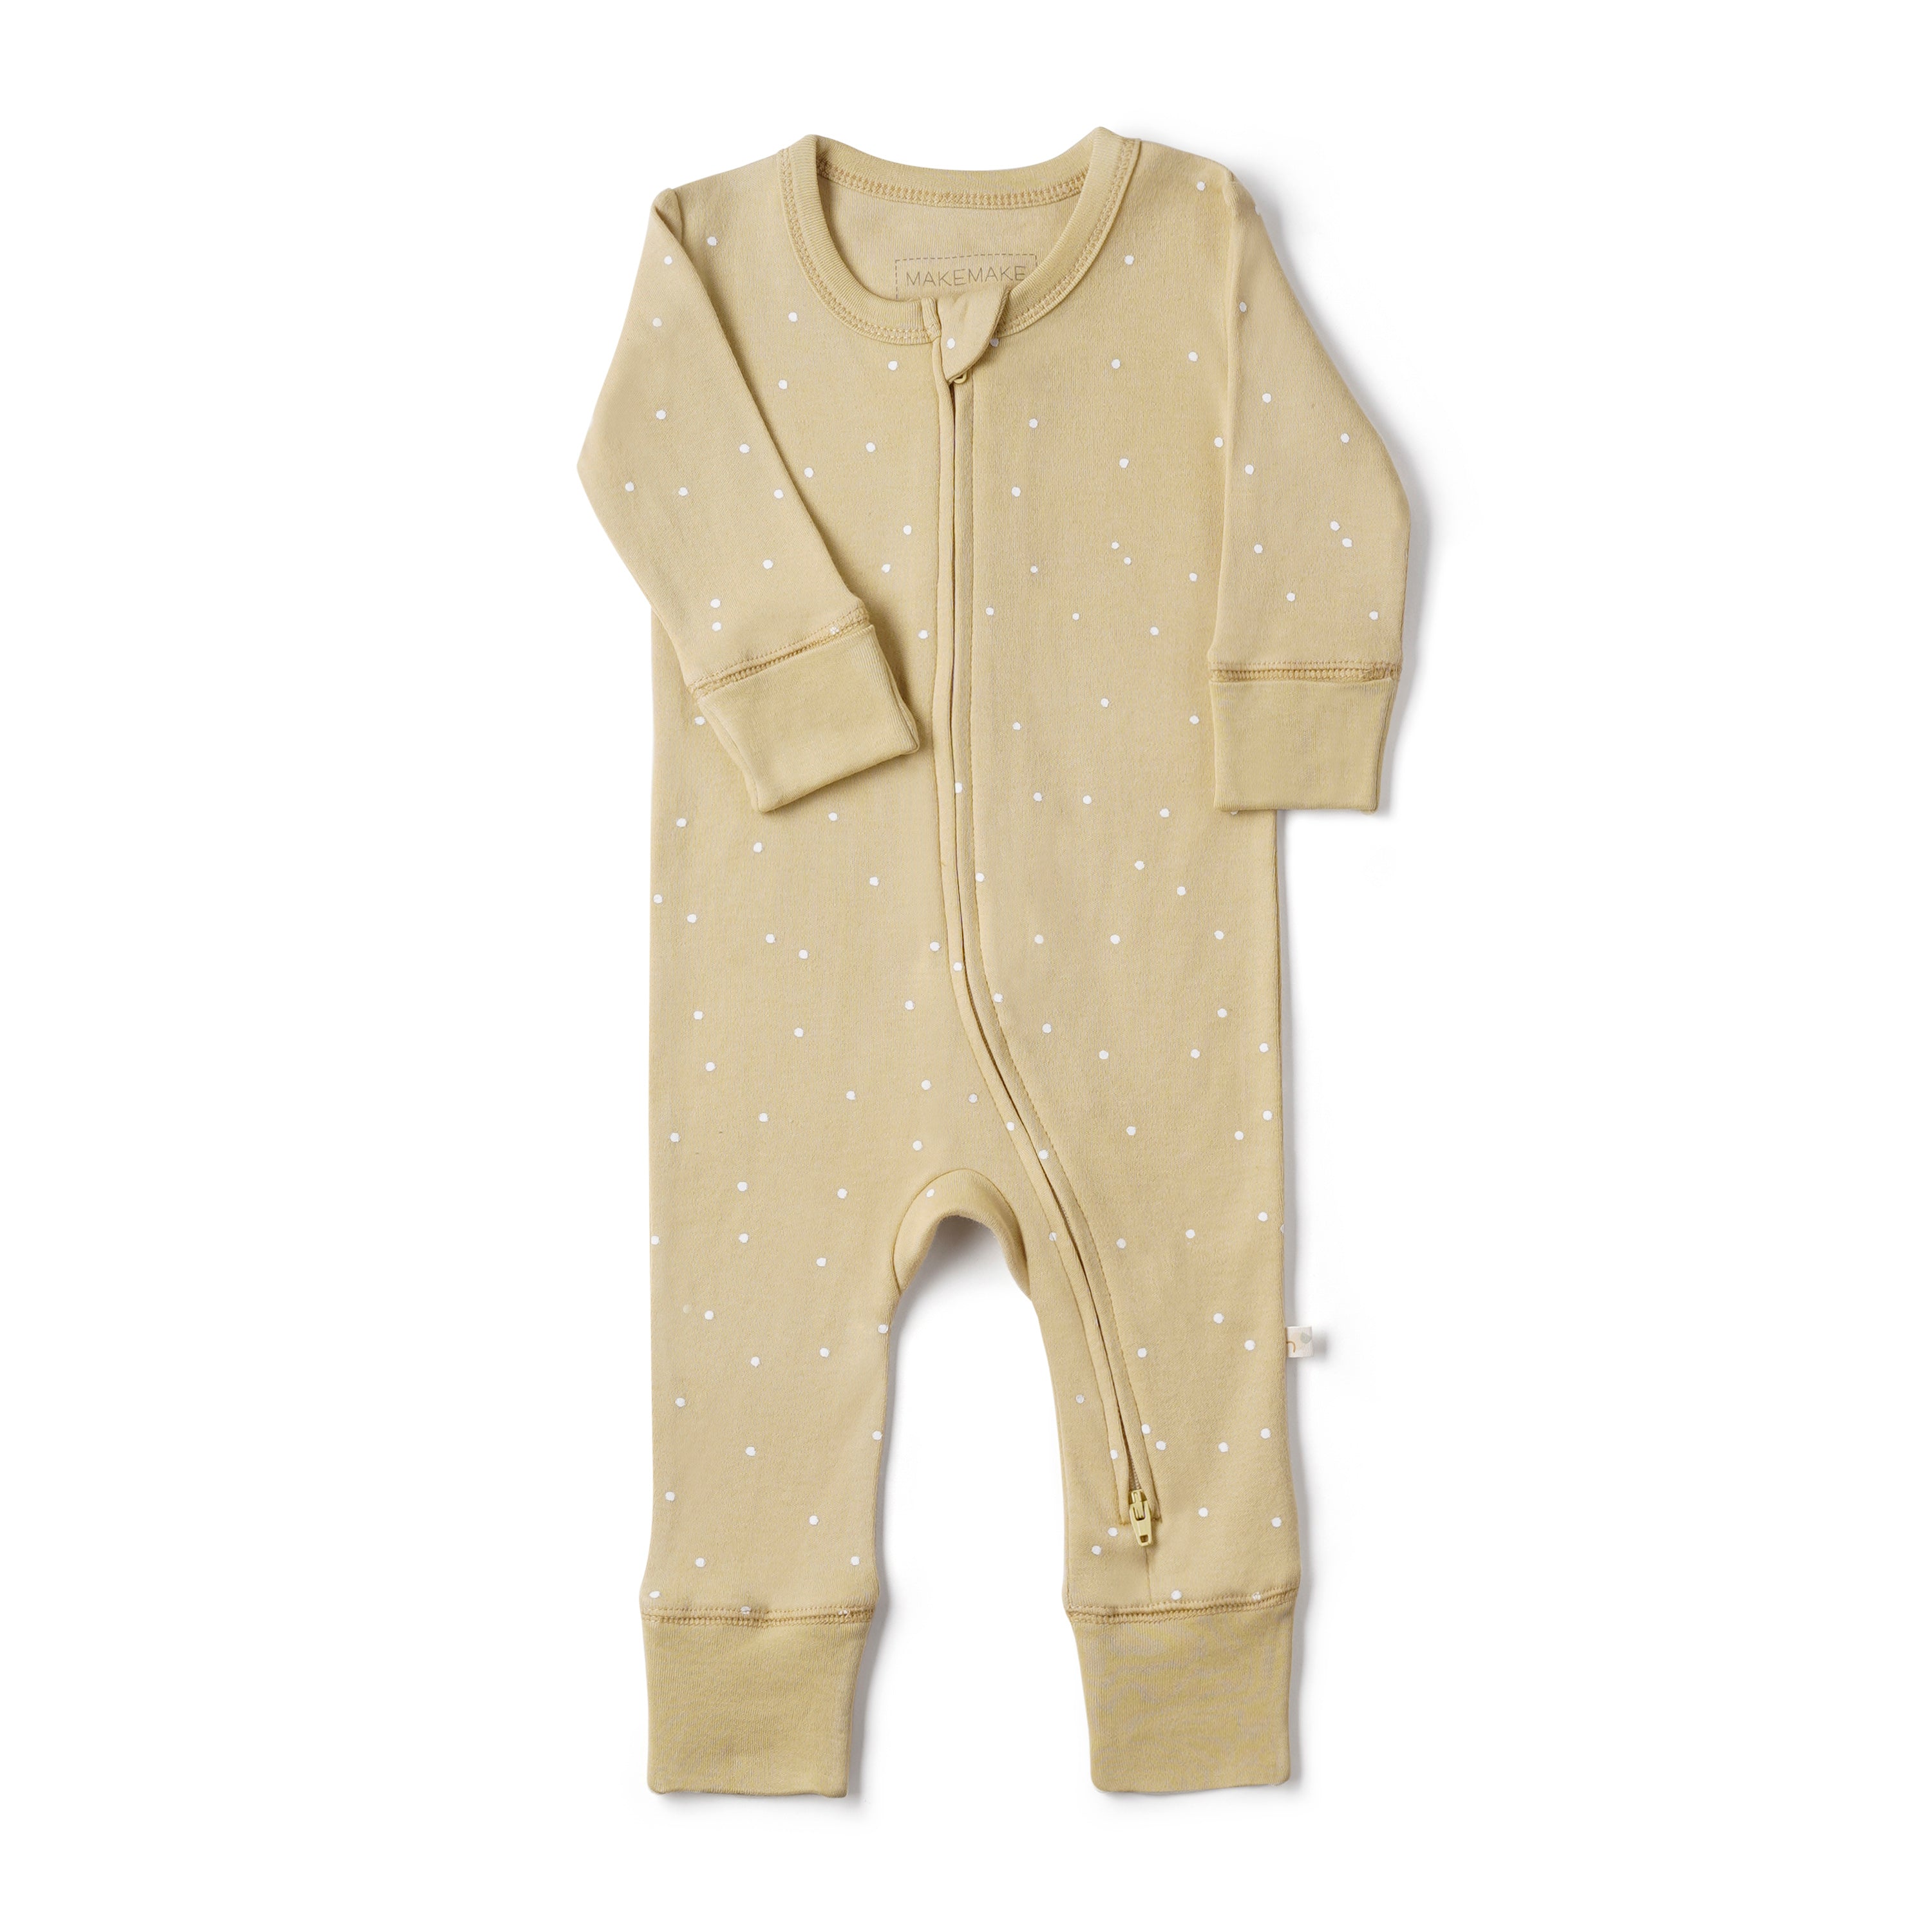 A Organic Baby Yellowstone Organic 2-Way Zip Romper, pale yellow with tiny white polka dots displayed flat against a white background.